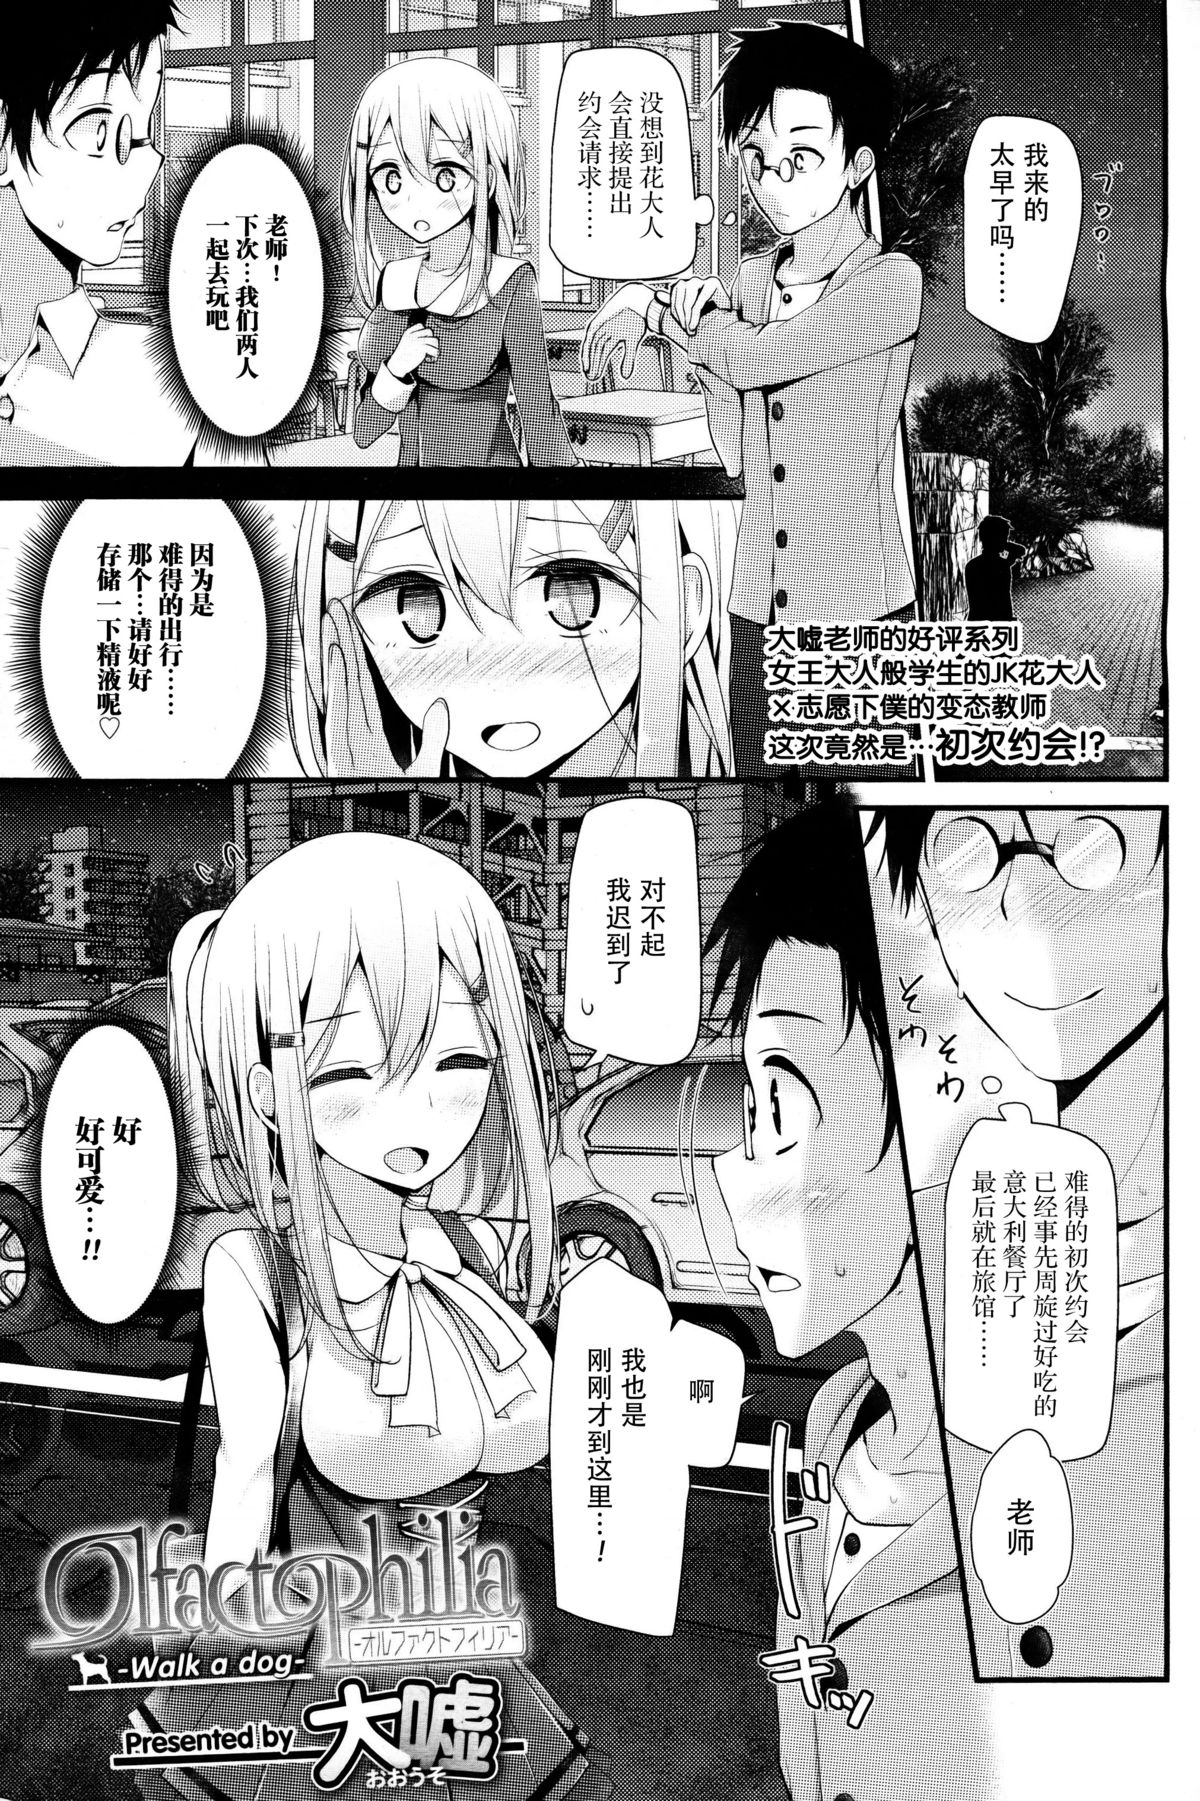 [Oouso] Olfactophilia -Walk a dog- (Girls forM Vol. 09) [Chinese] [脸肿汉化组] page 3 full